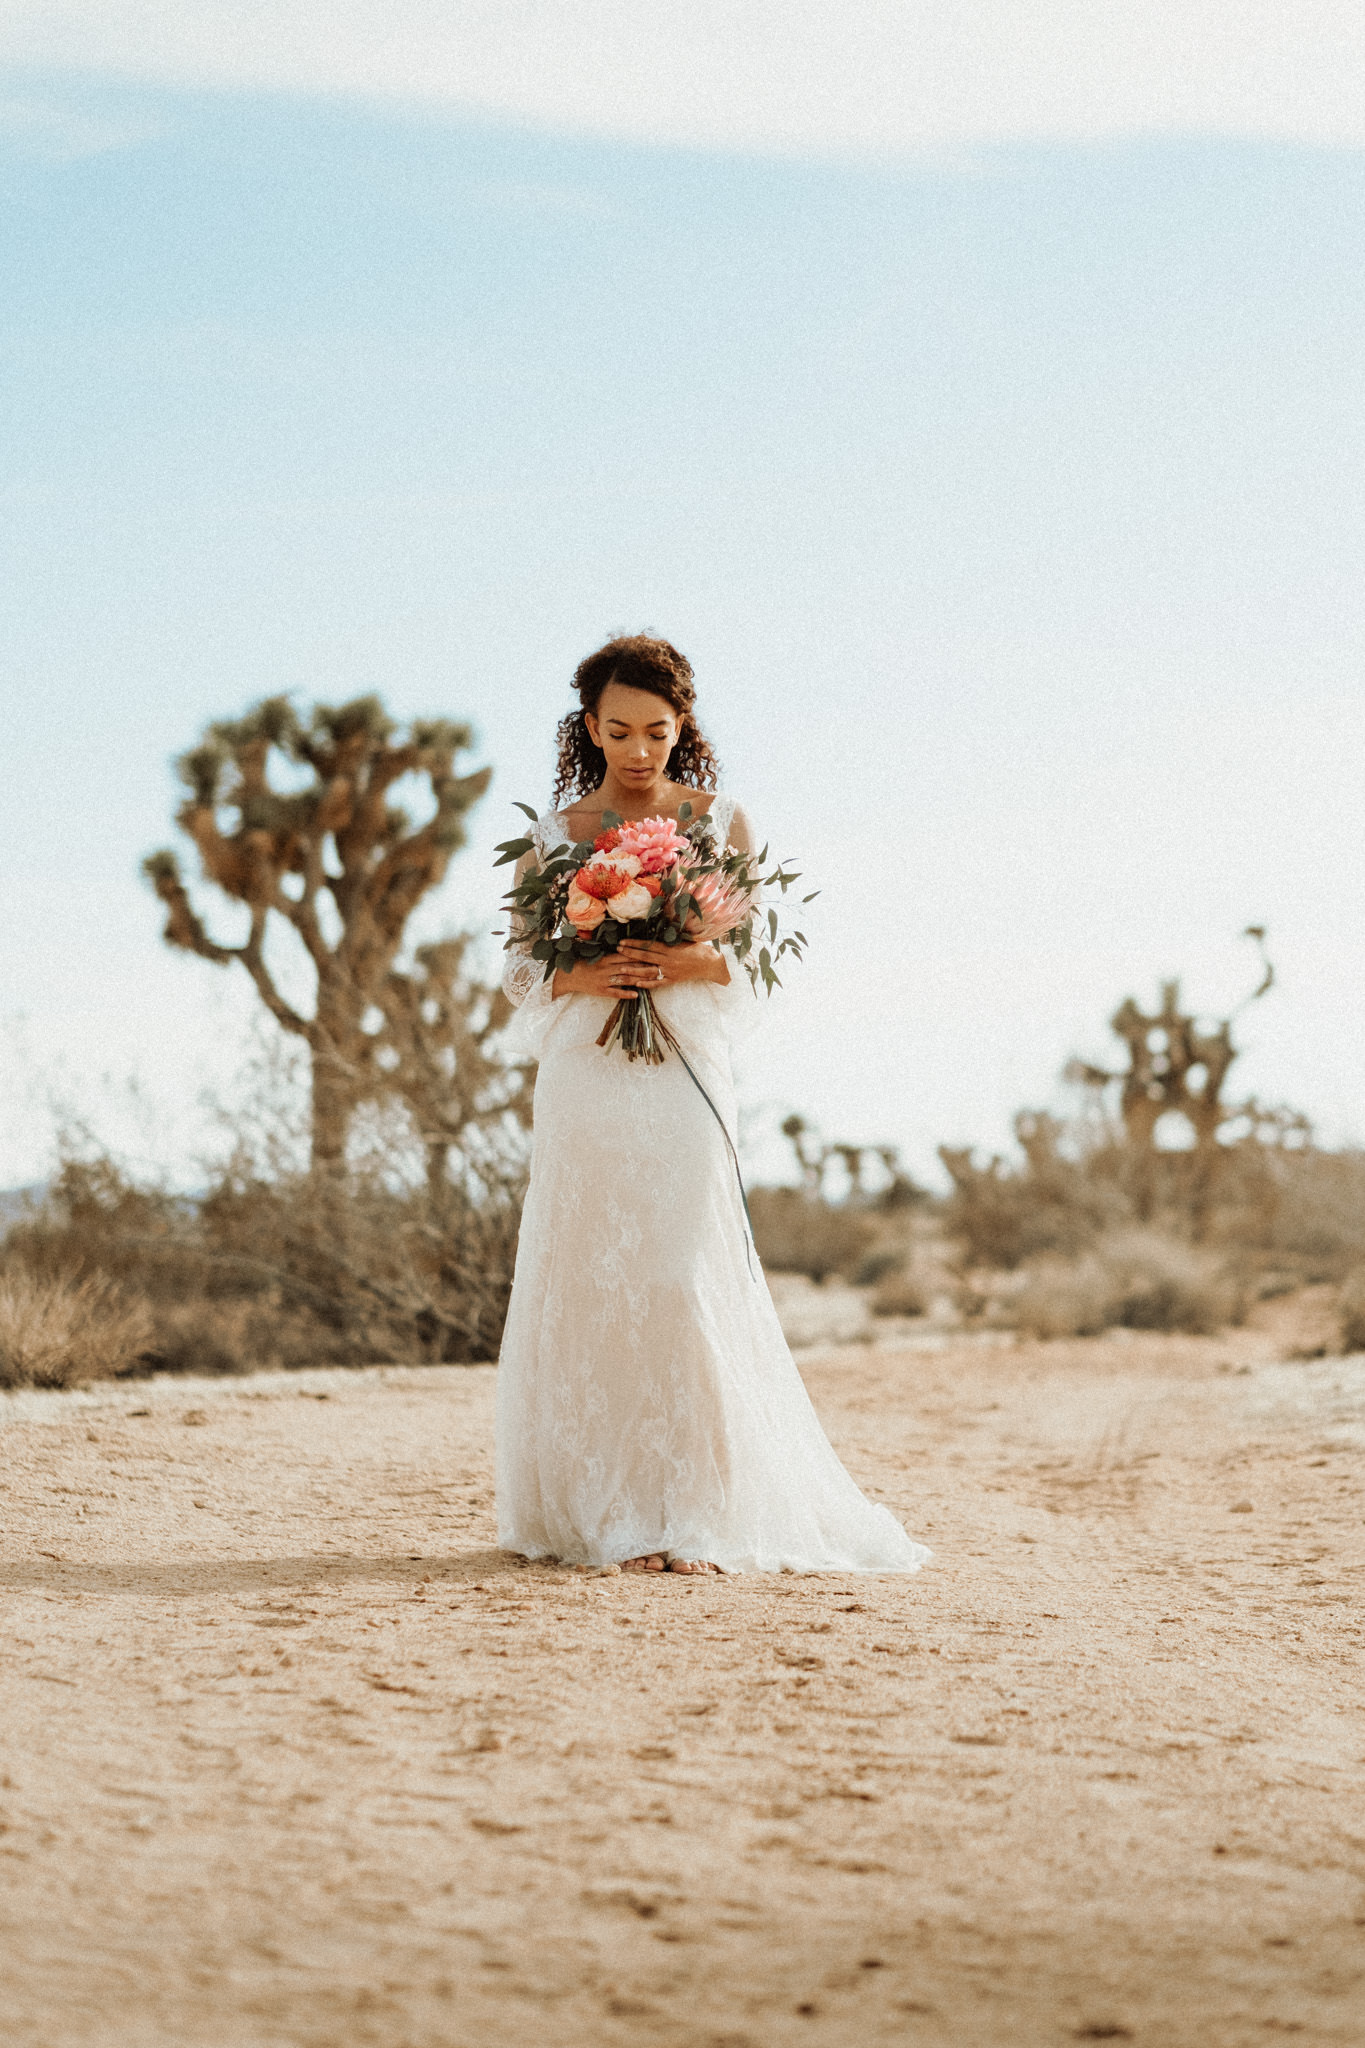 Wedding dress in Joshua Tree - Bridal Collections Images